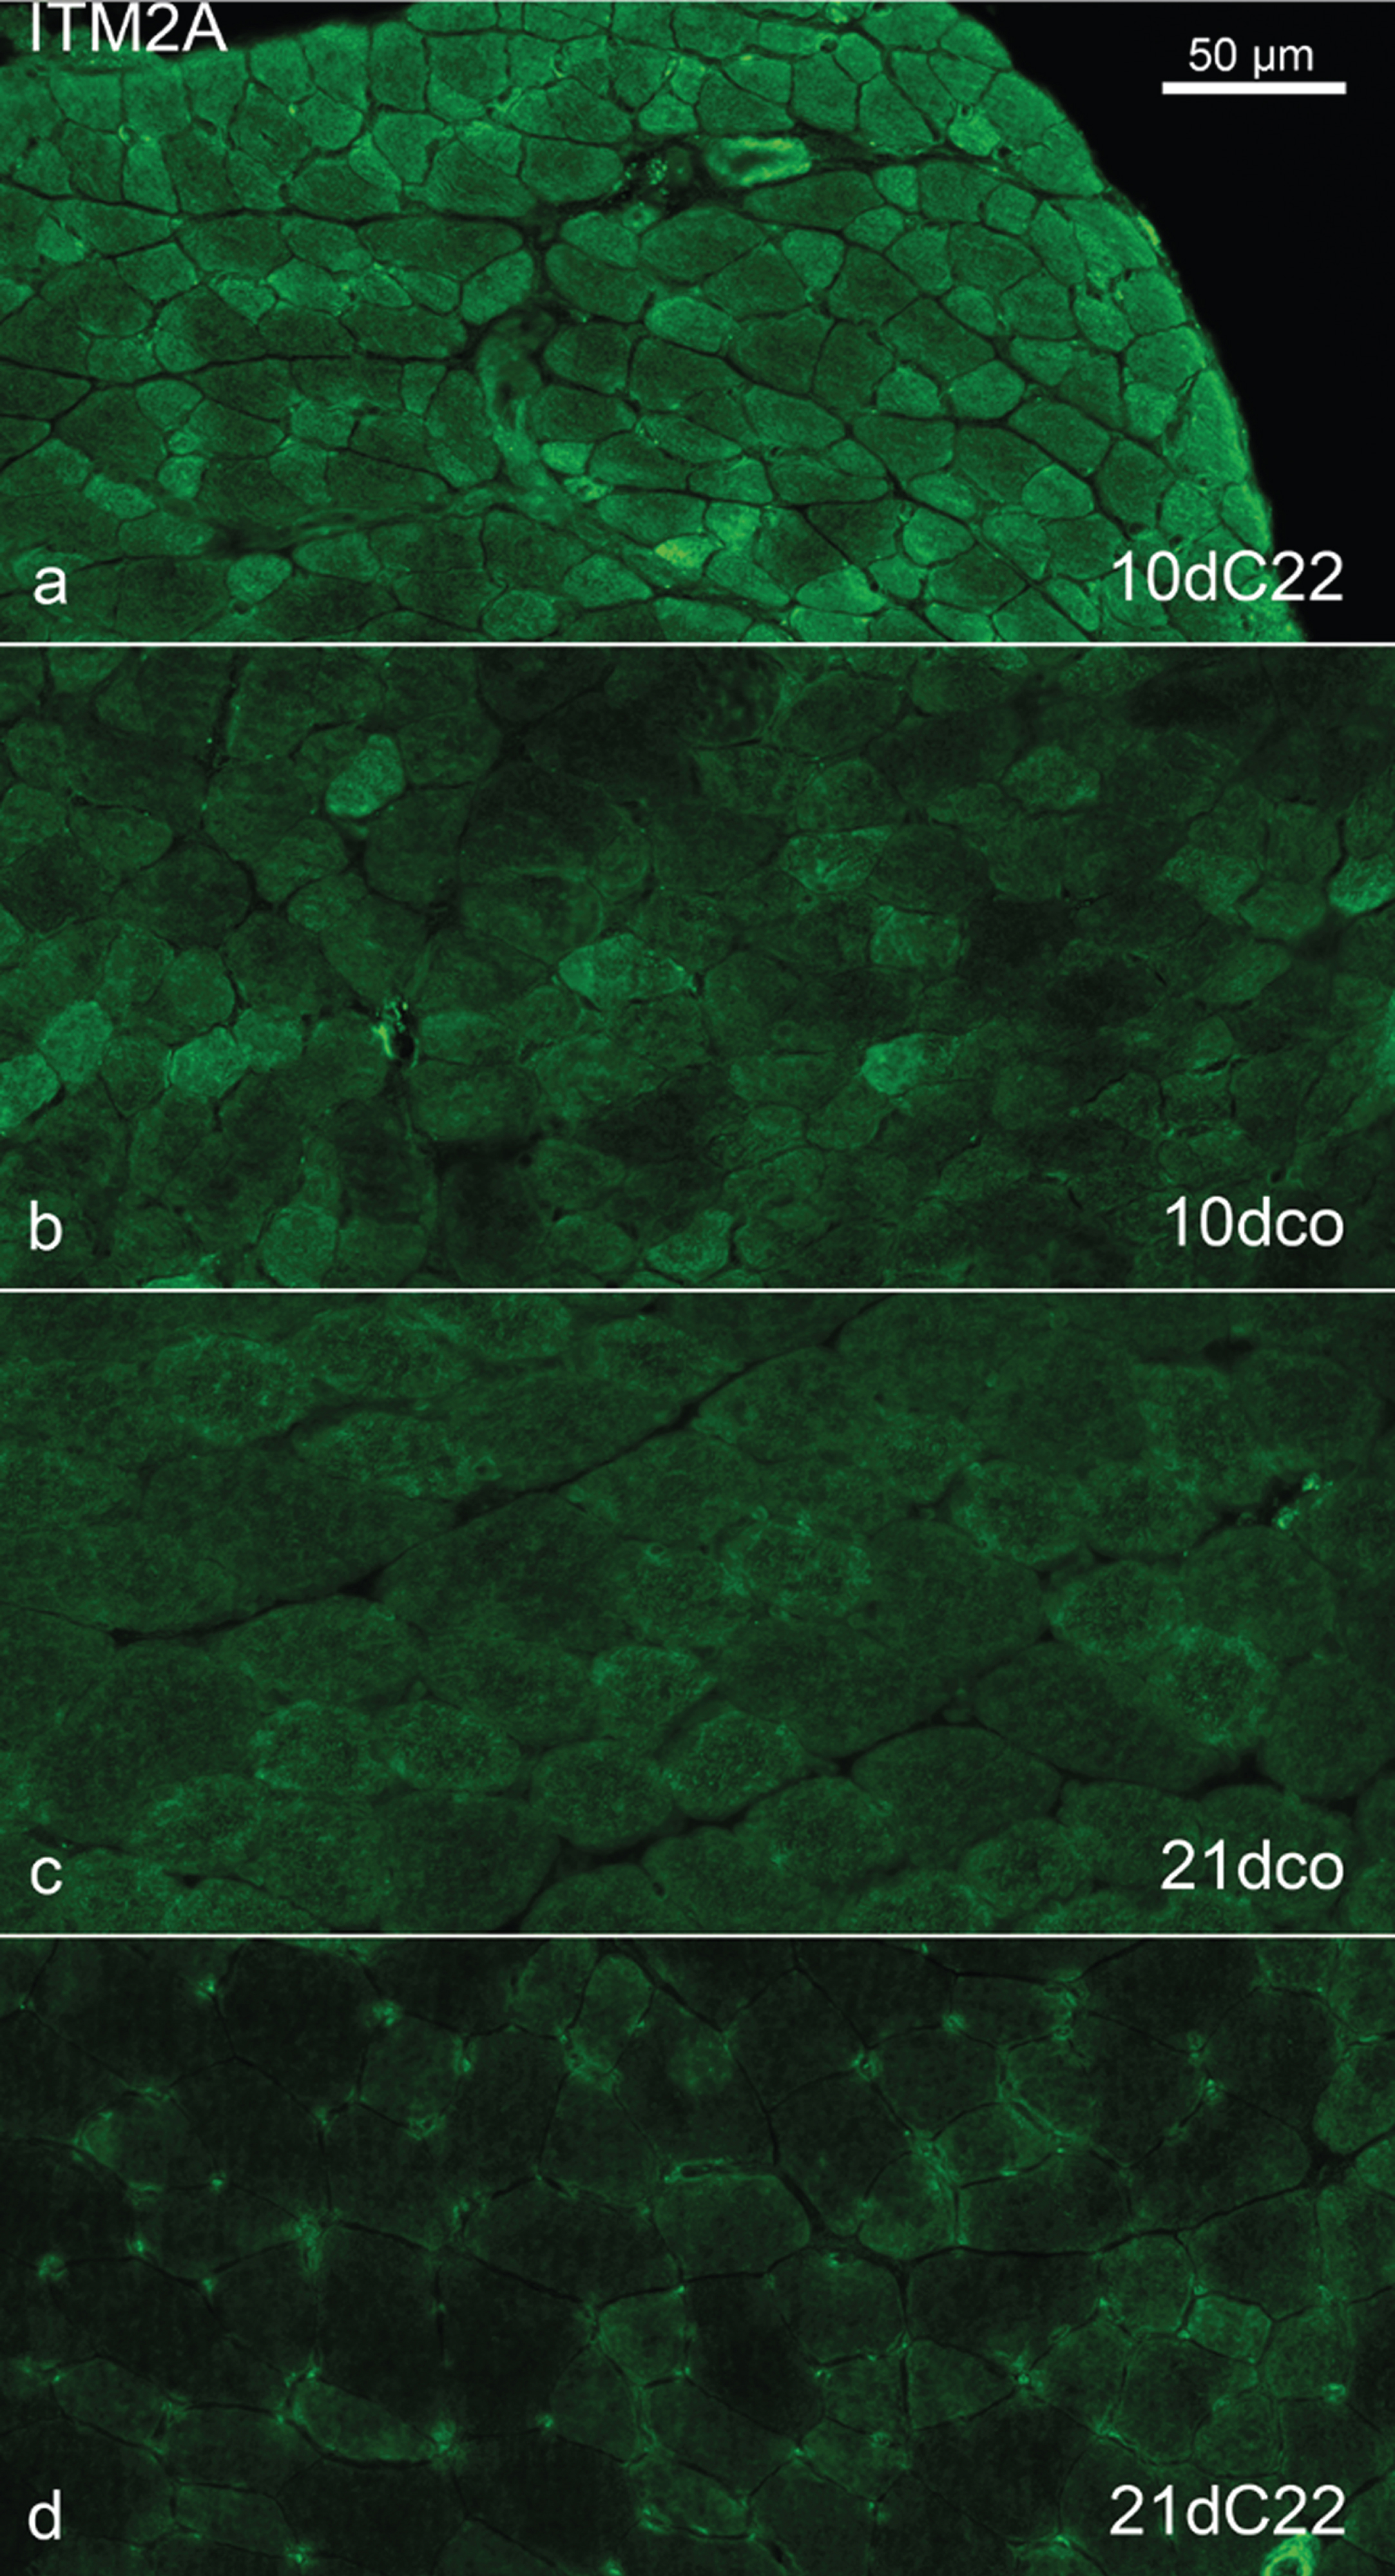 Comparison of anti-ITM2A immunohistochemistry in samples of the young mouse groups. Anti-ITM2A immunohistochemistry of TA muscles from 10dC22 (a), 10dco (b), 21dco (c) and 21dC22 (d), identical exposure time, settings etc. and image processing throughout. Note gradient of muscle fibre reactivity. Primary magnification was 40fold, scale bar in (a) indicates 50μm for all images.